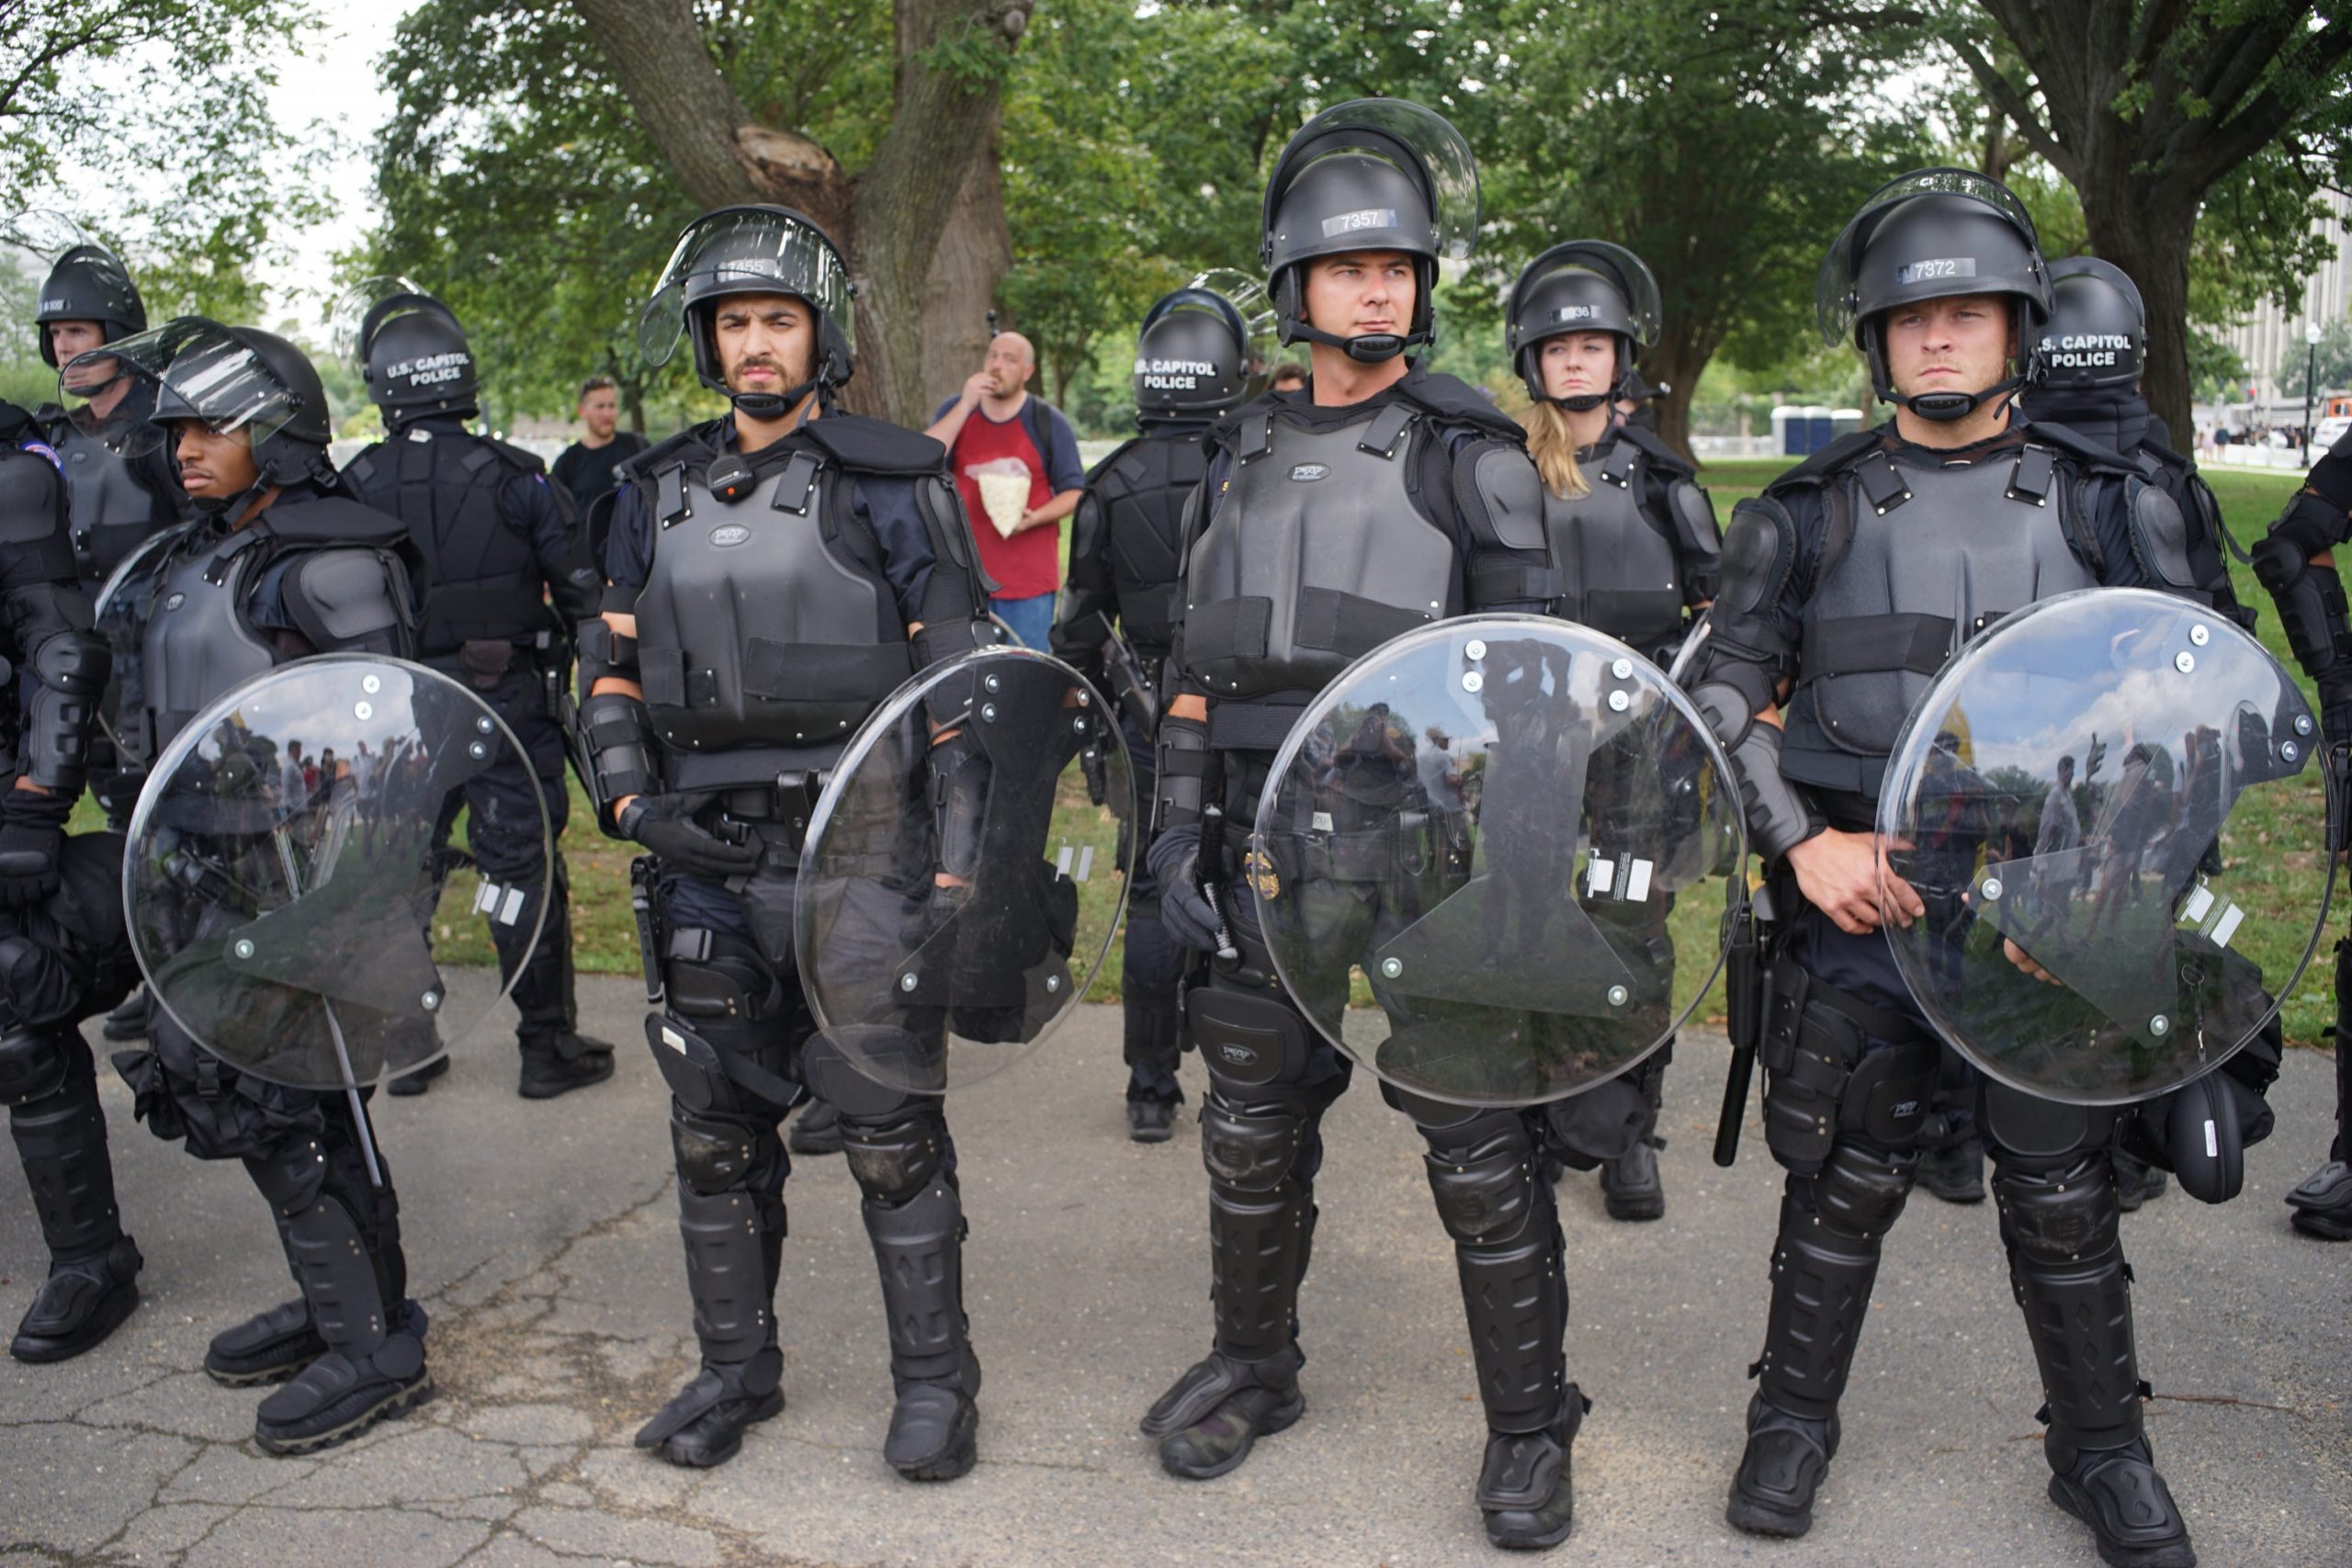 A row of police in riot gear.